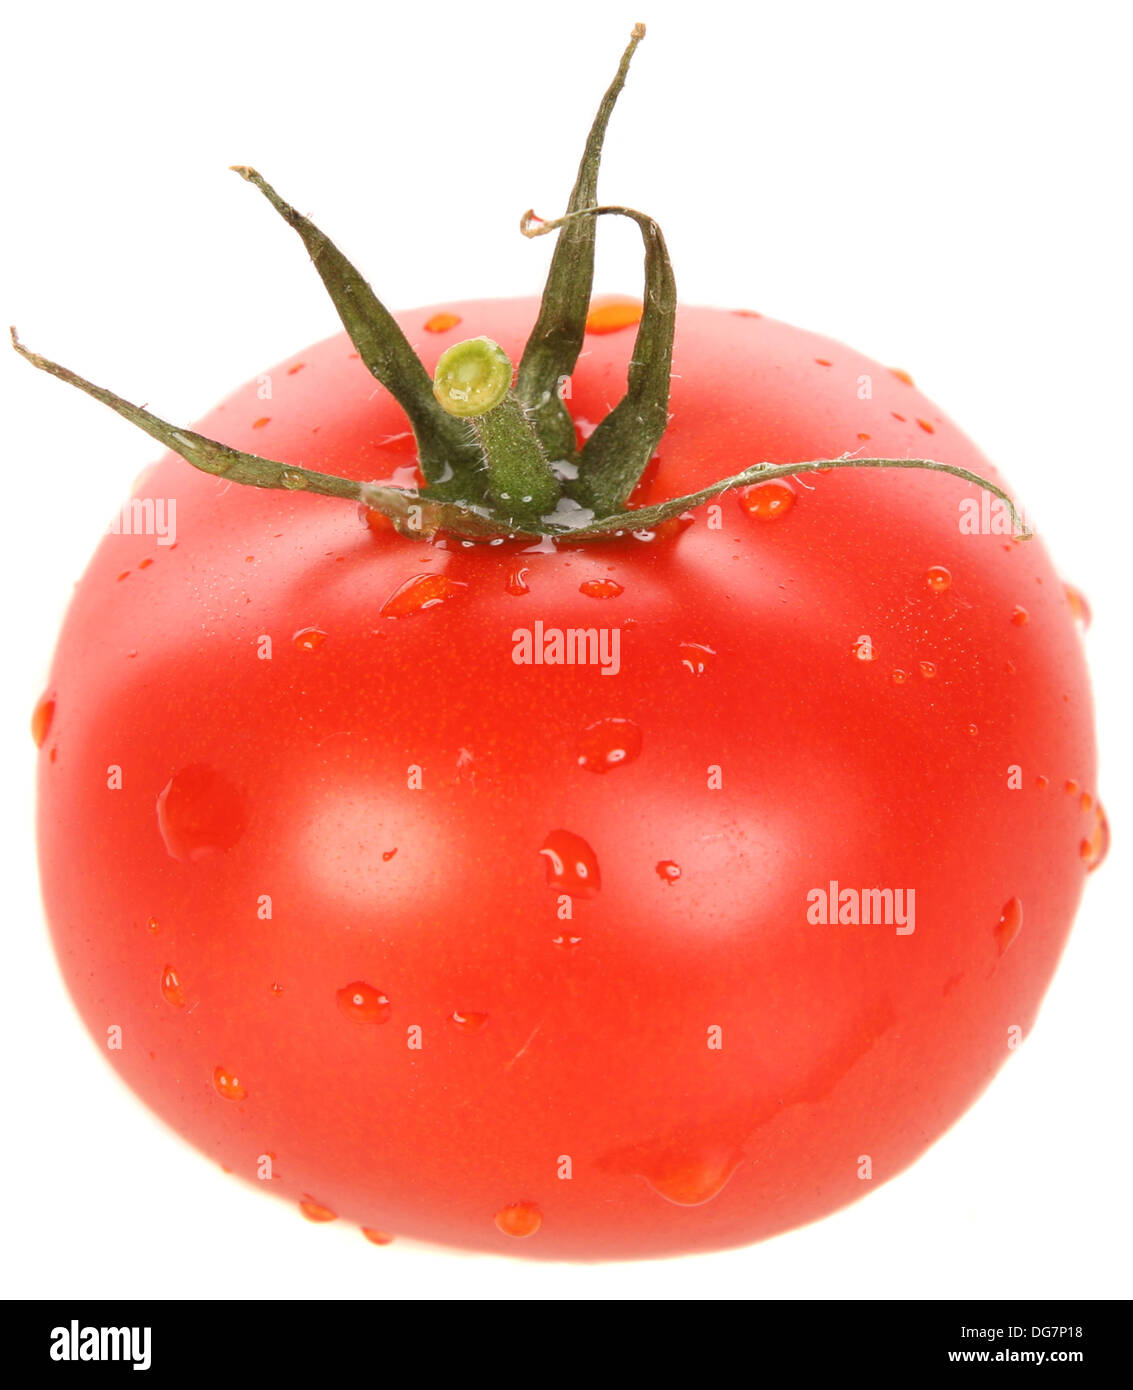 Whole tomato with drops of water Stock Photo